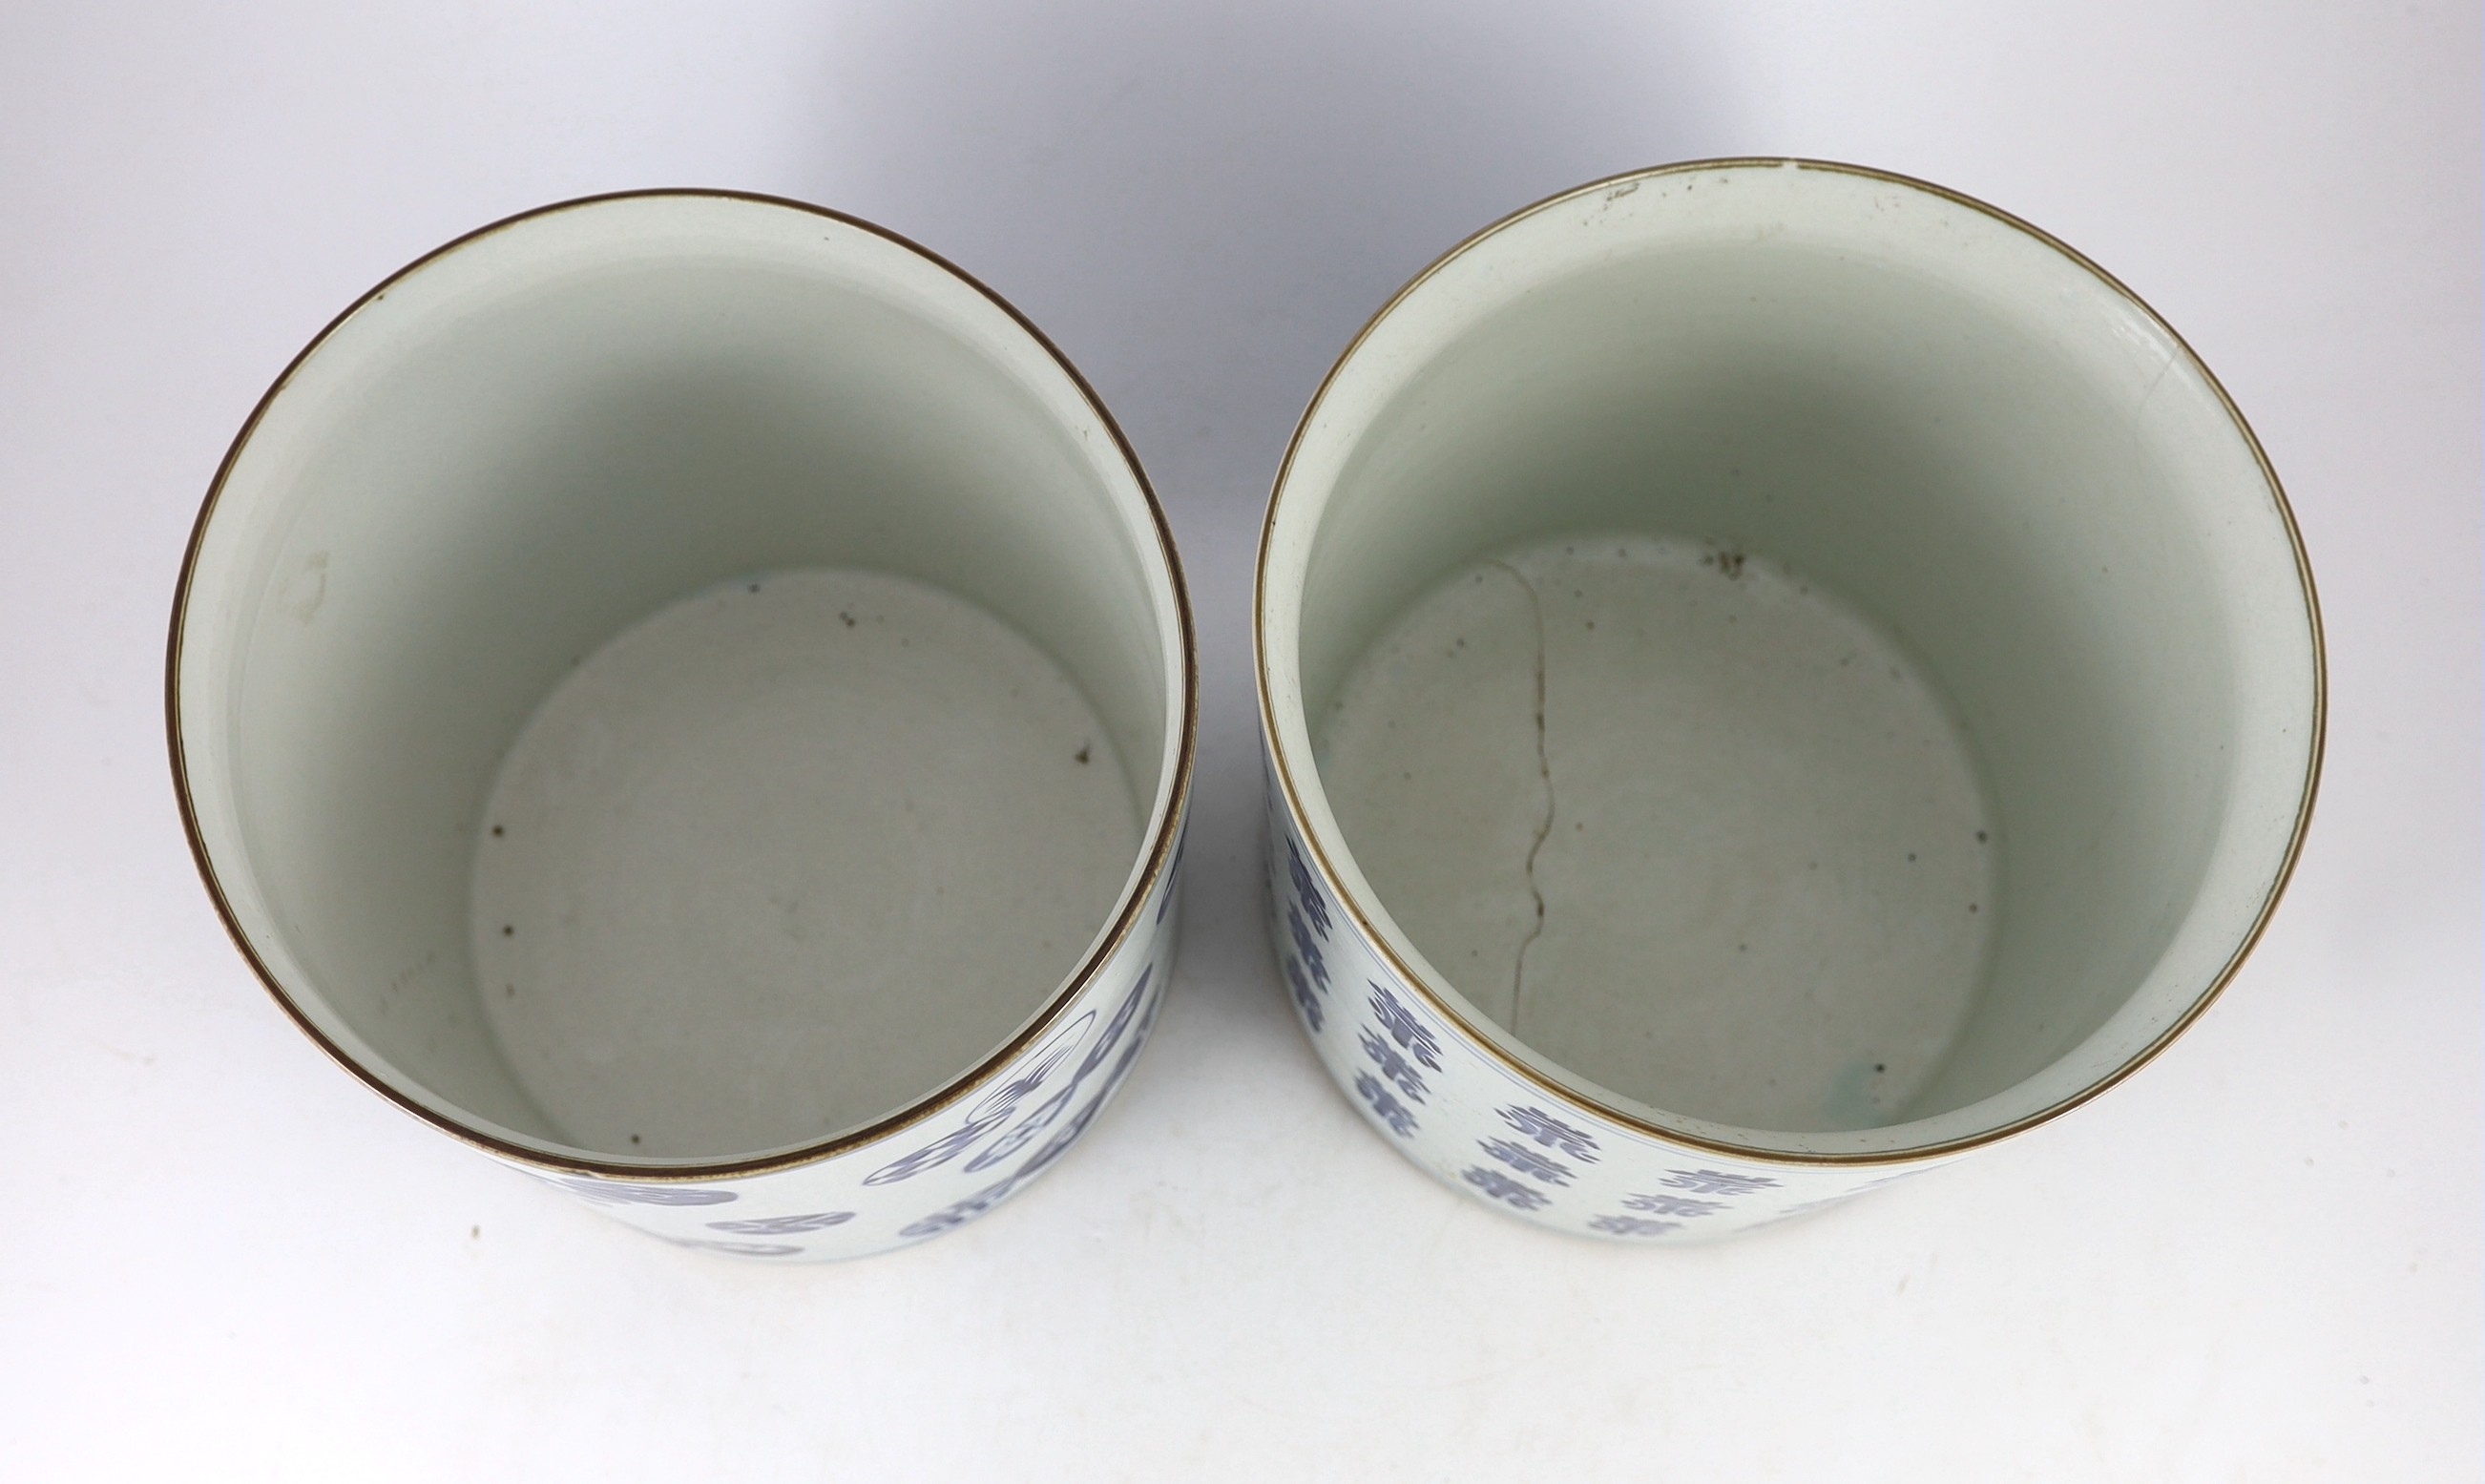 A pair of large Chinese blue and white brushpots, late 19th century 25 cm diameter, one cracked